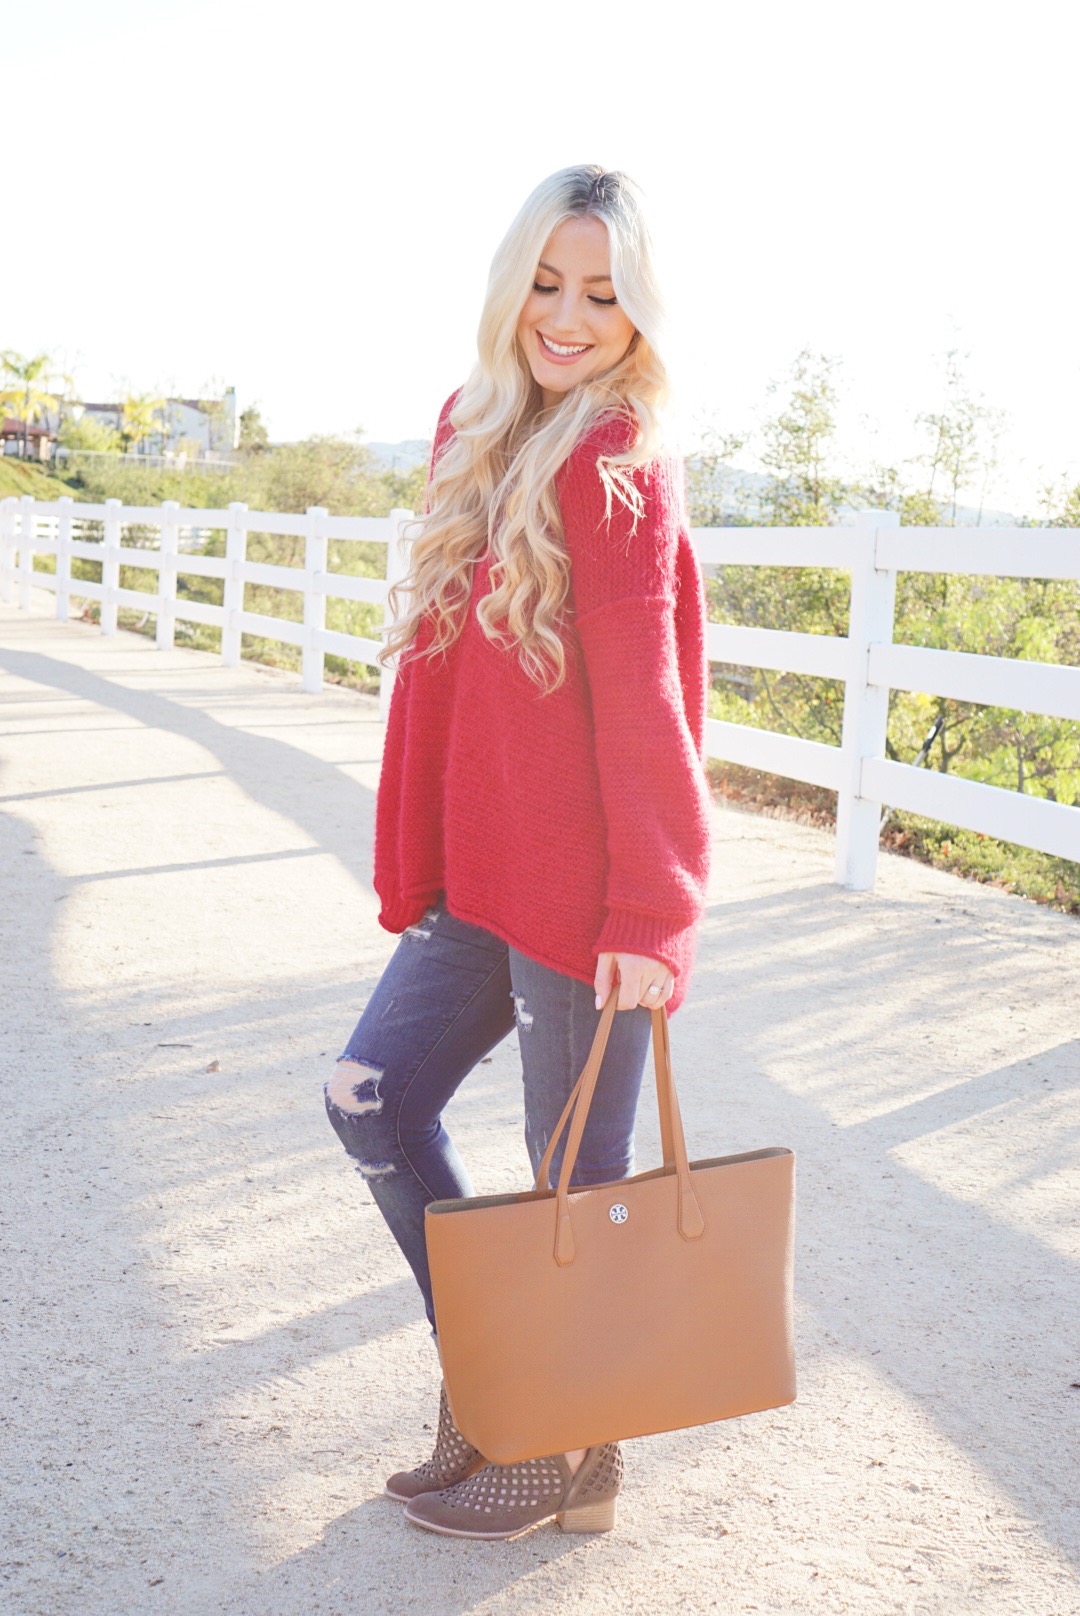 Katelyn Jones A Touch of Pink Slouchy Sweater Jeffery Campbell Cut Out Booties